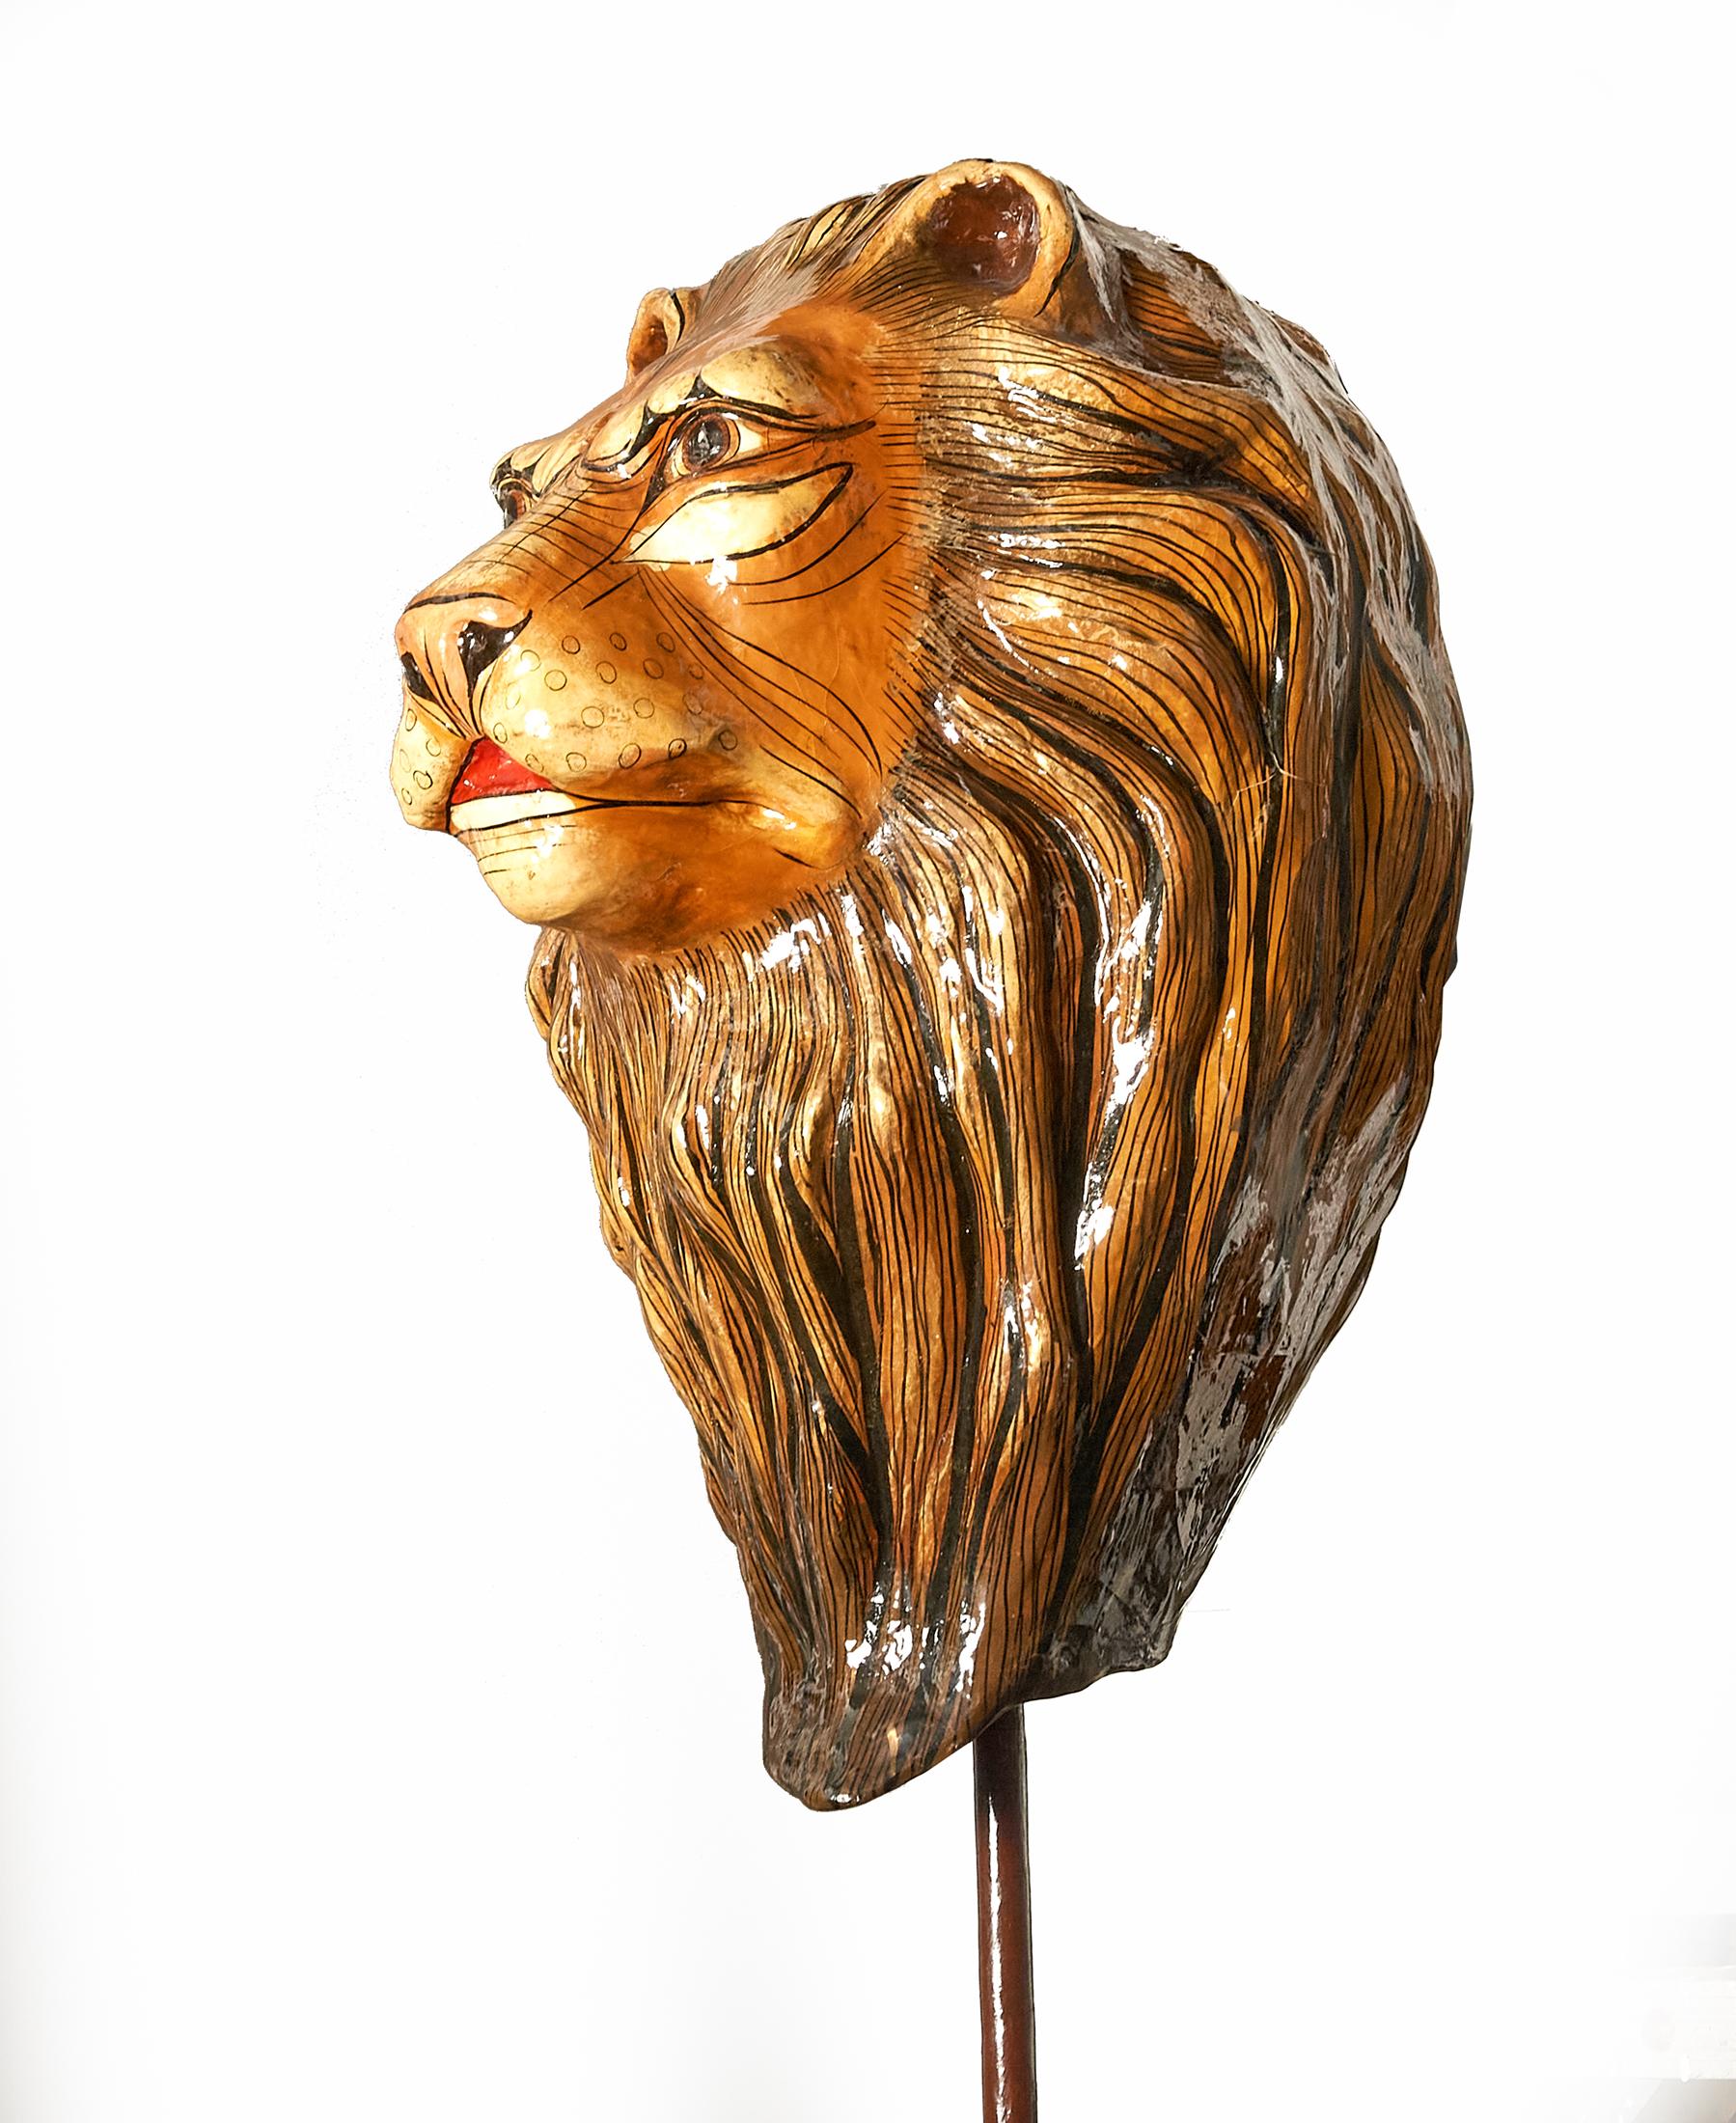 Limited edition papier mâché sculpture by well listed artist Sergio Bustamante. Signed and numbered 9/100 made in the later 20th century, Bustamante used a well balanced color palette to create this whimsical regal lion. 

Sergio Bustamante is a